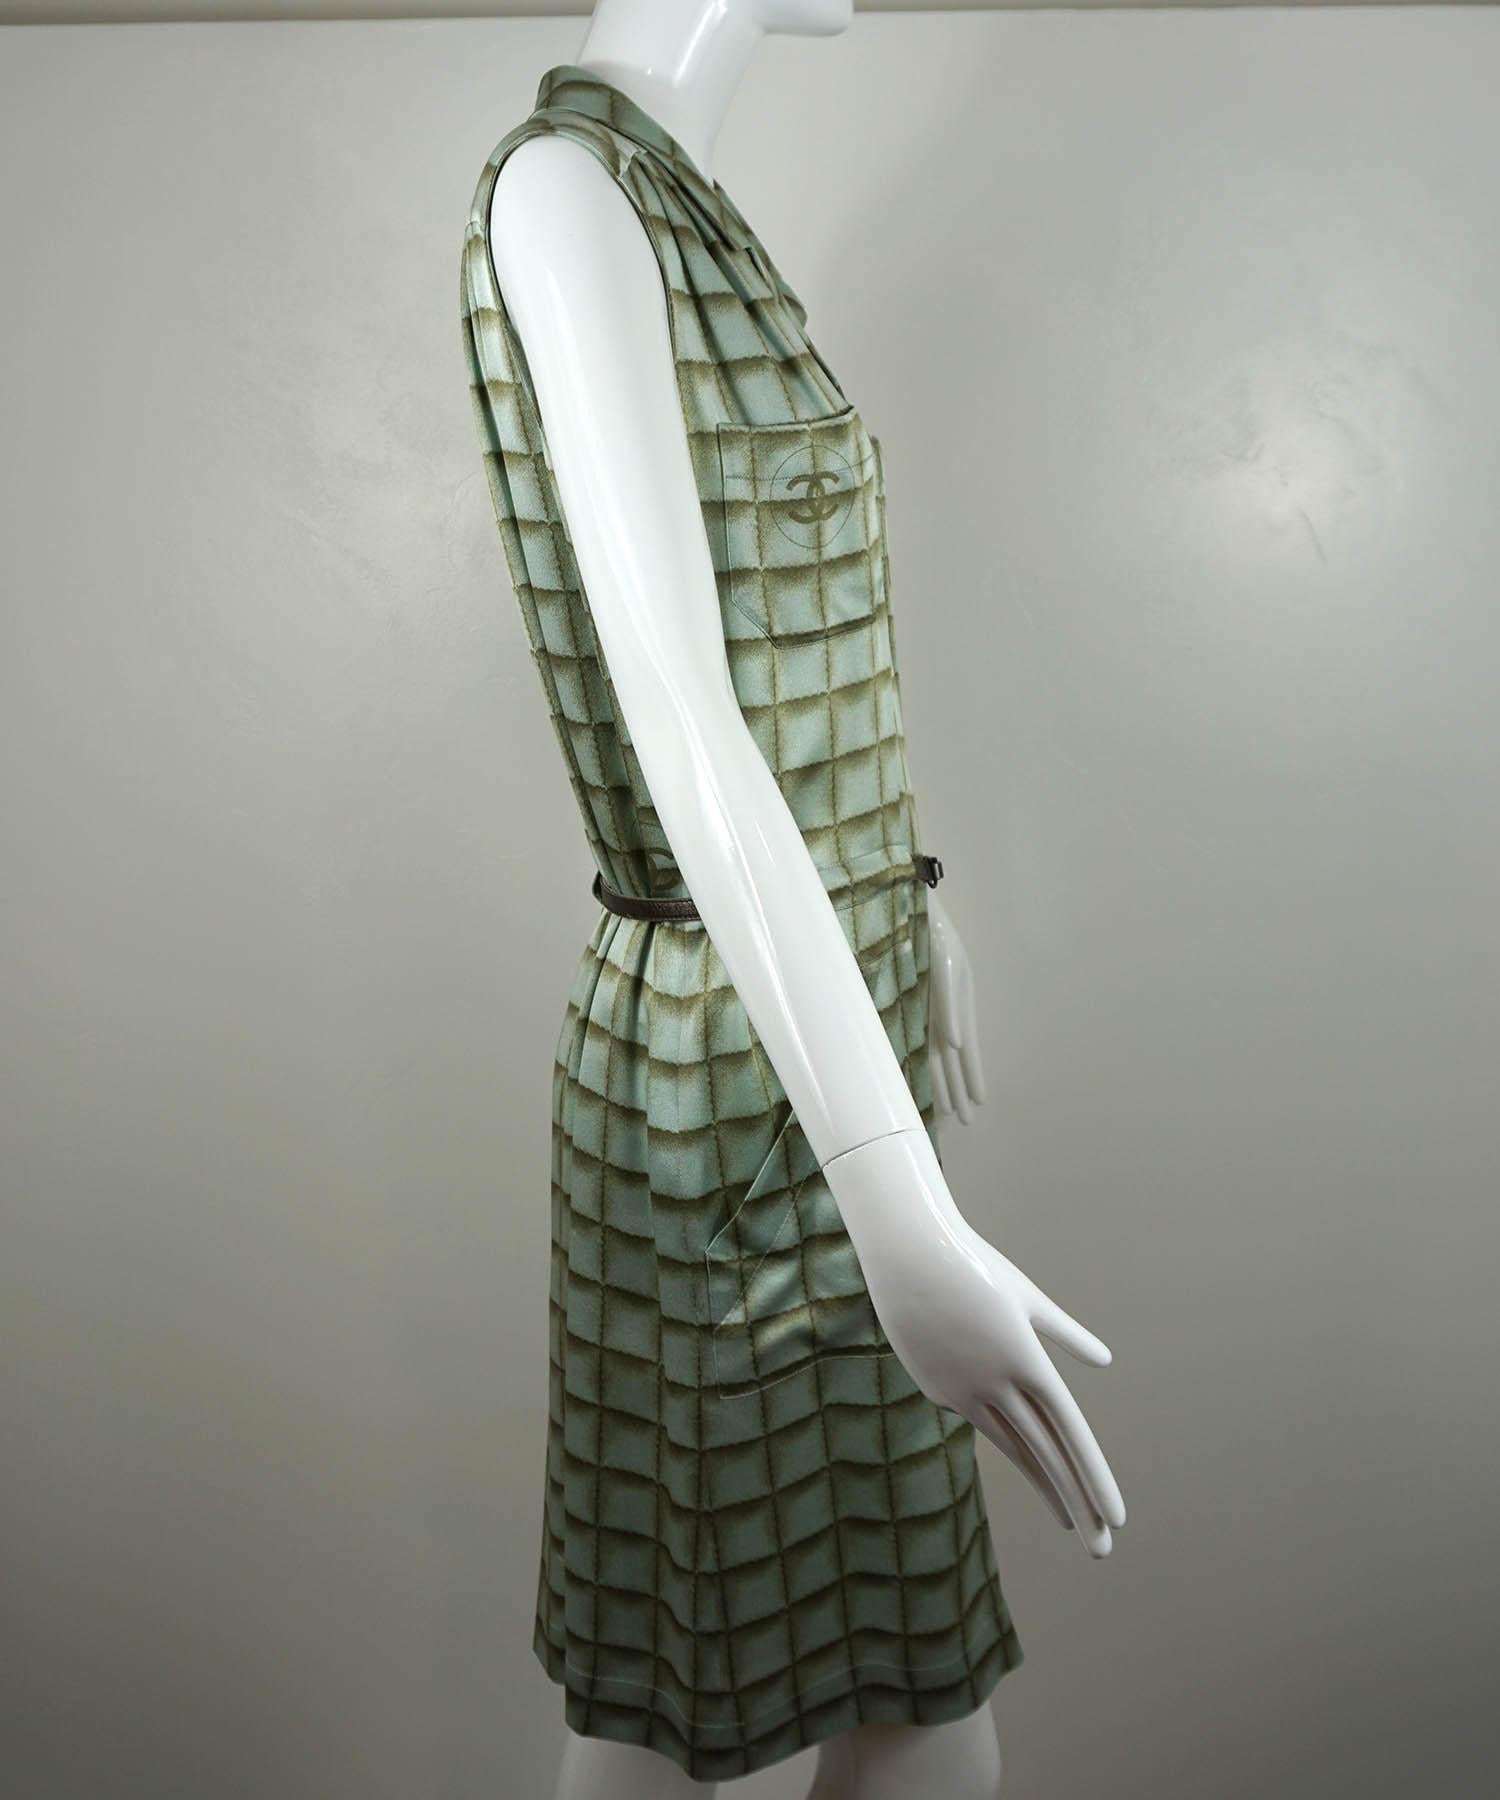 Chanel sleeveless dress, from their 2000 Fall Collection, is featured in seafoam green silk with a built in metallic brown belt, four pockets and interlocking CC logo details. Designer size 42. Made in France. Very good condition: minor snags to